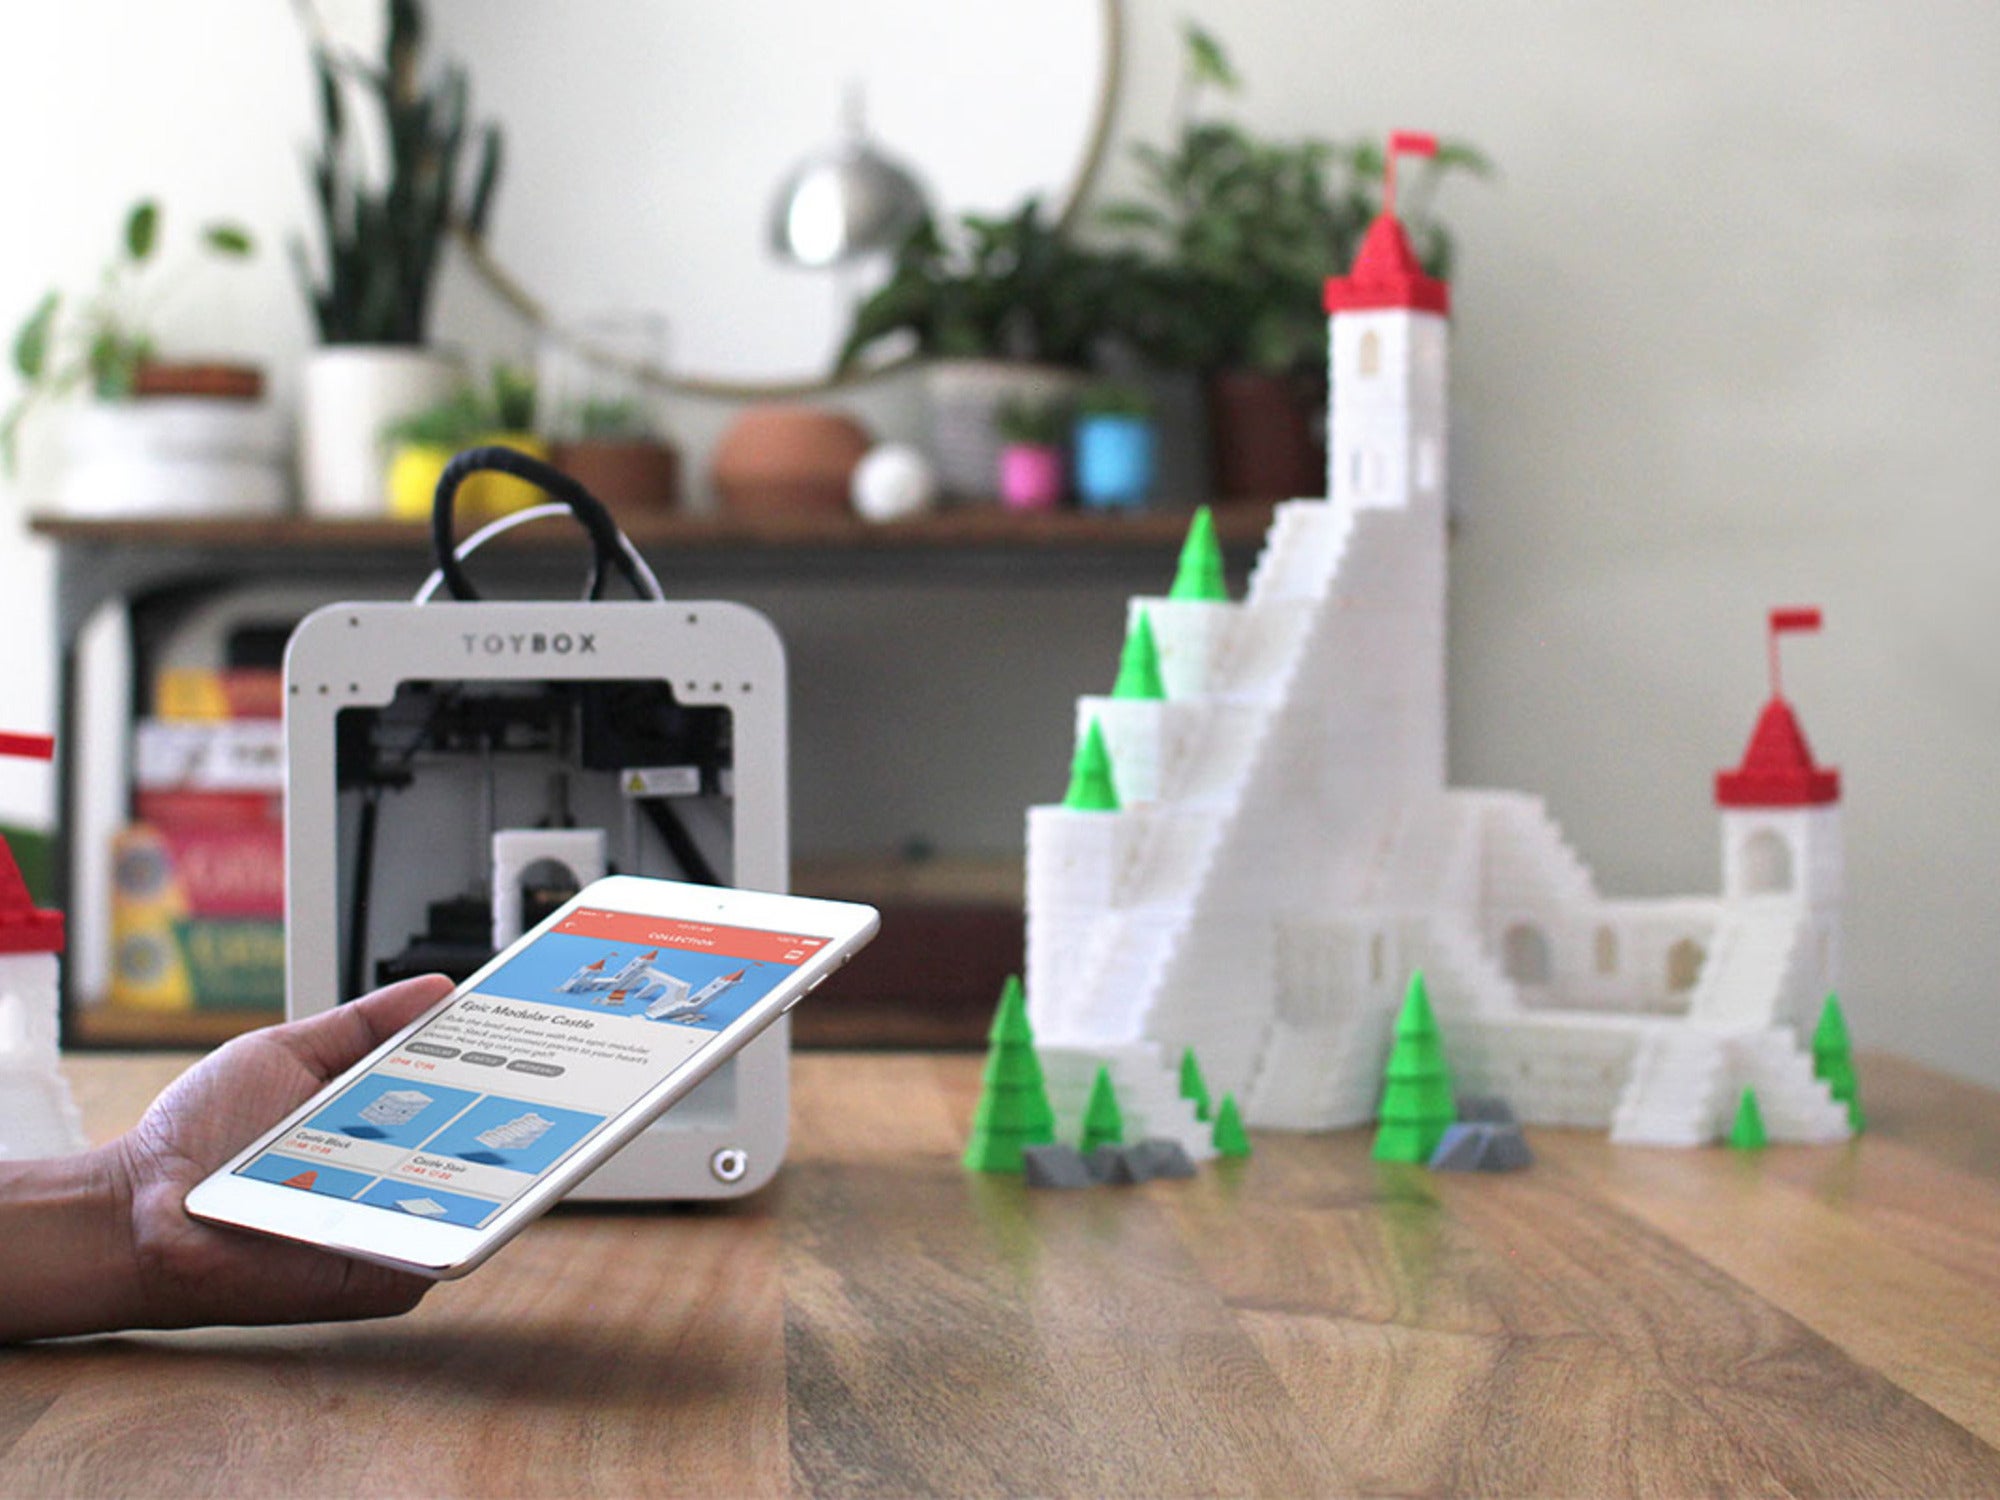 Make your own fun with this 3D Printer thumbnail